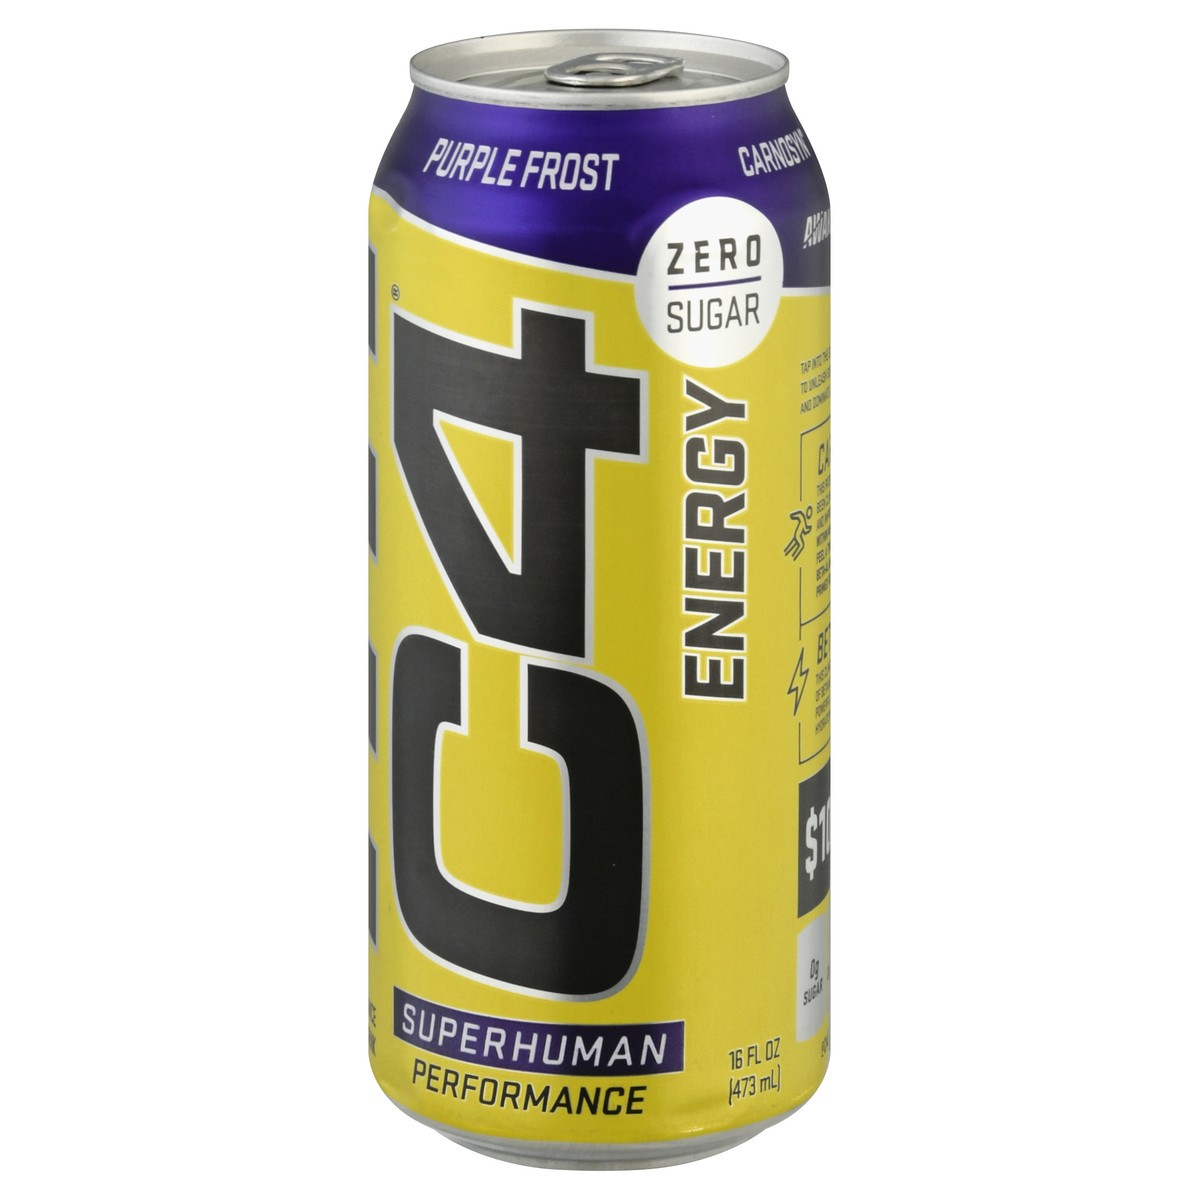 slide 9 of 12, C4 Energy, C4 Energy - Yellow Can, Carbonated, Grape Frost, 16 oz